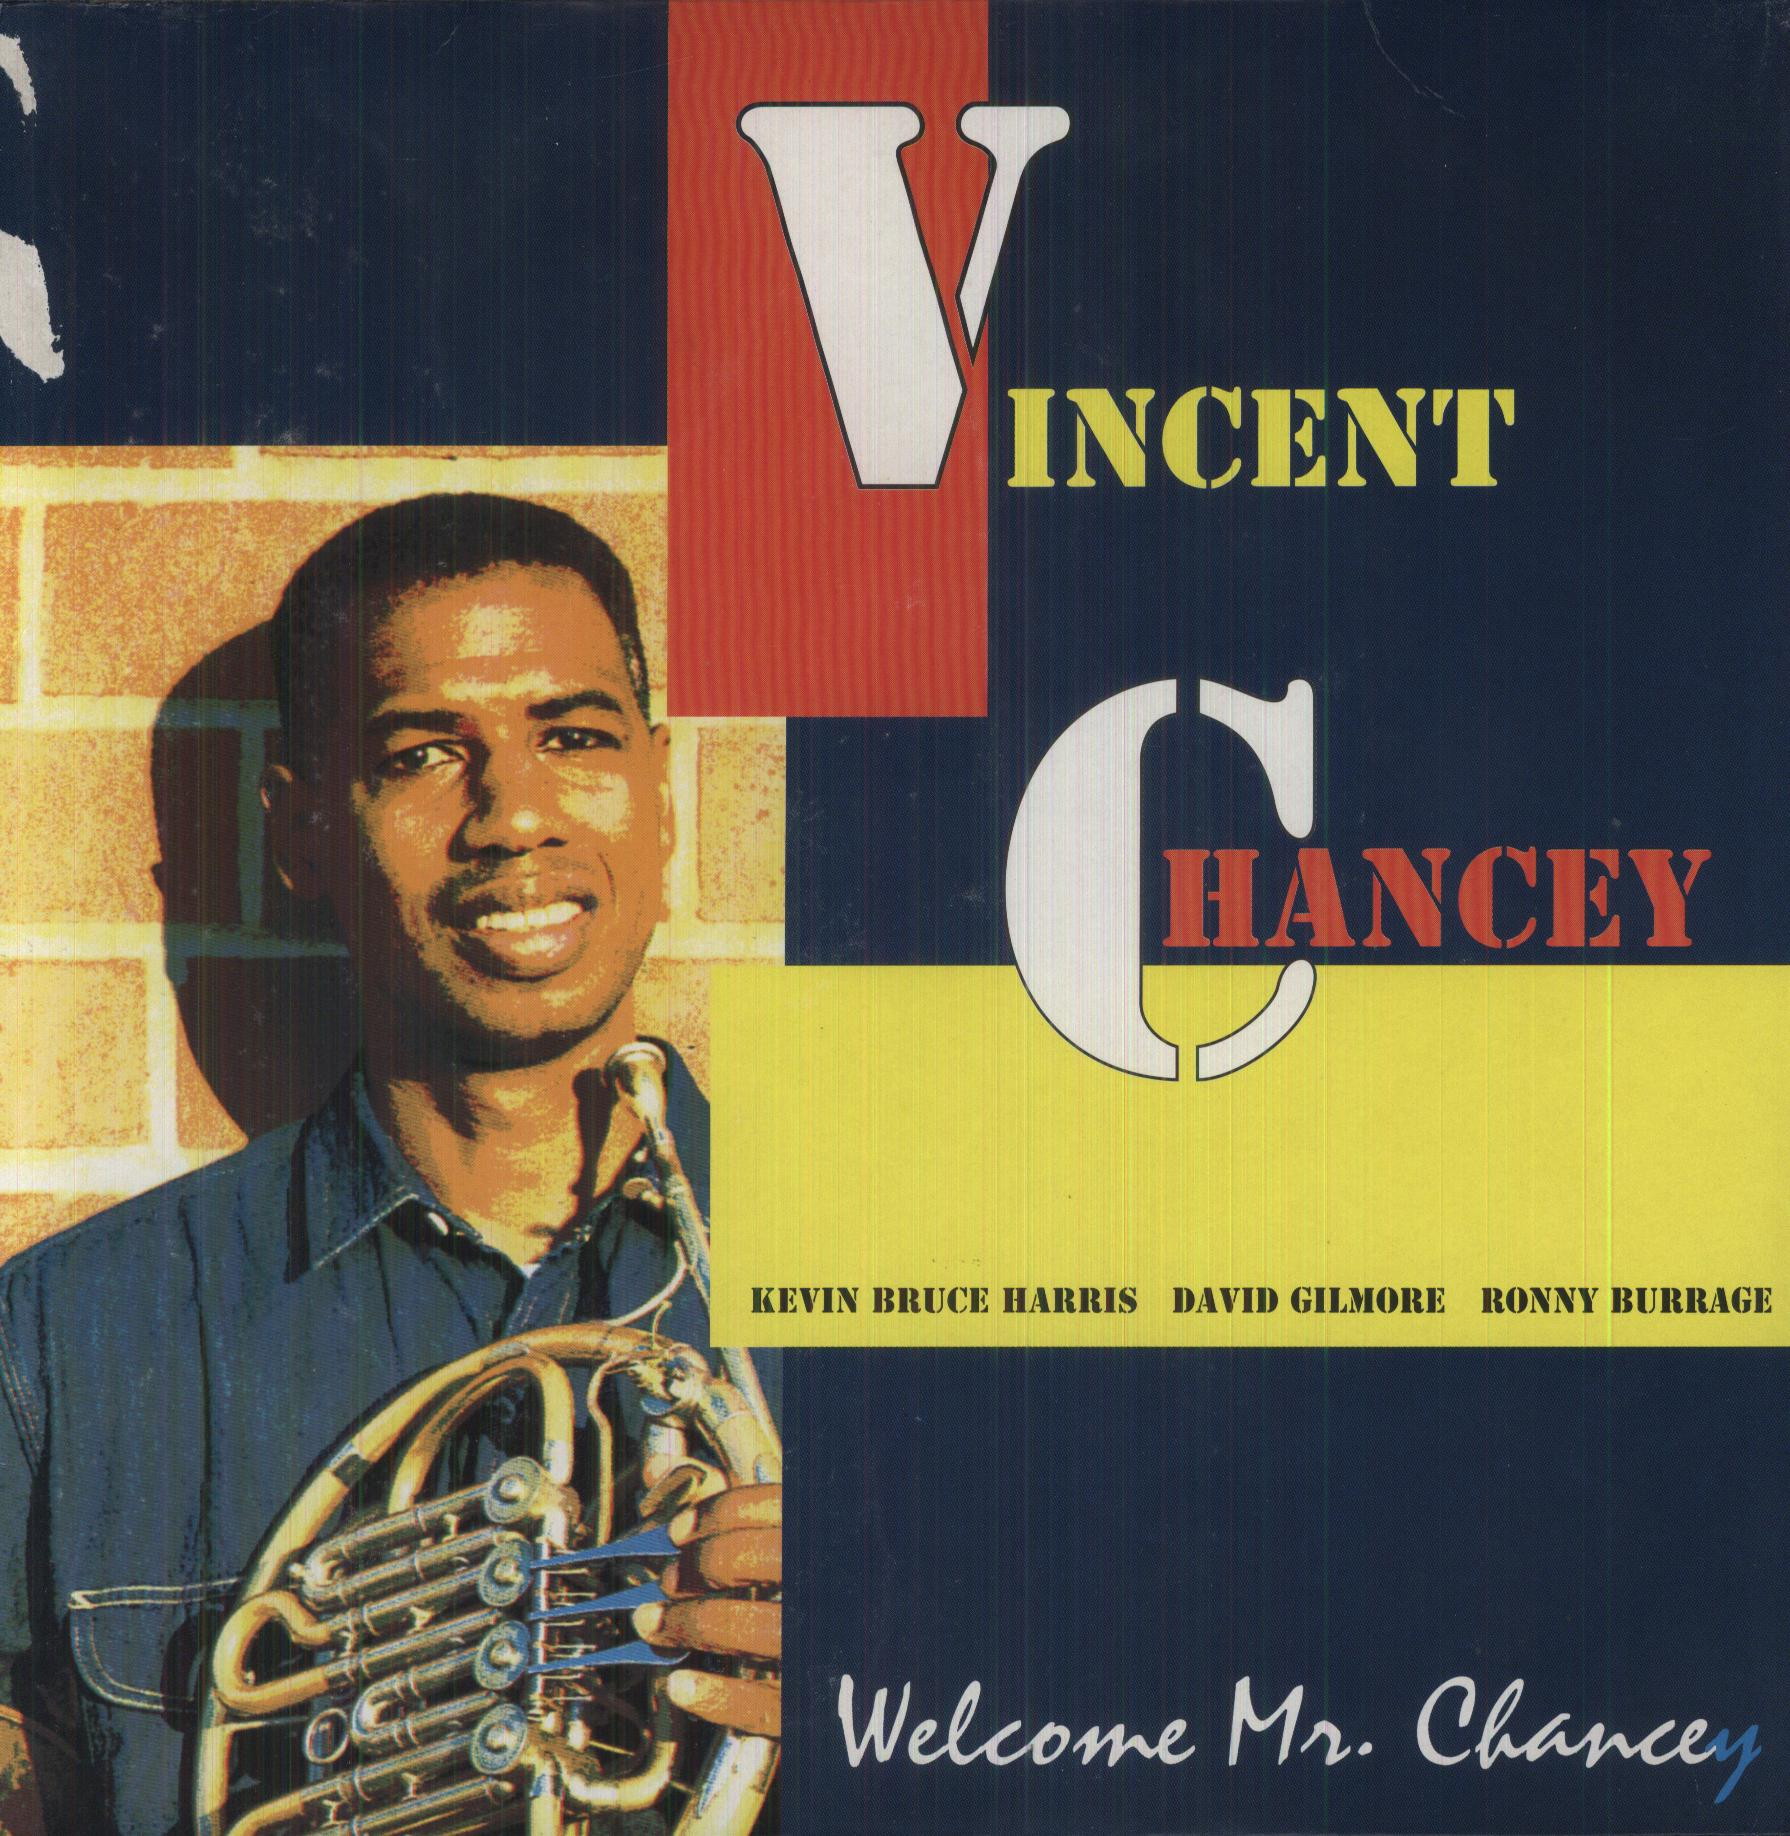 WELCOME MR CHANCEY